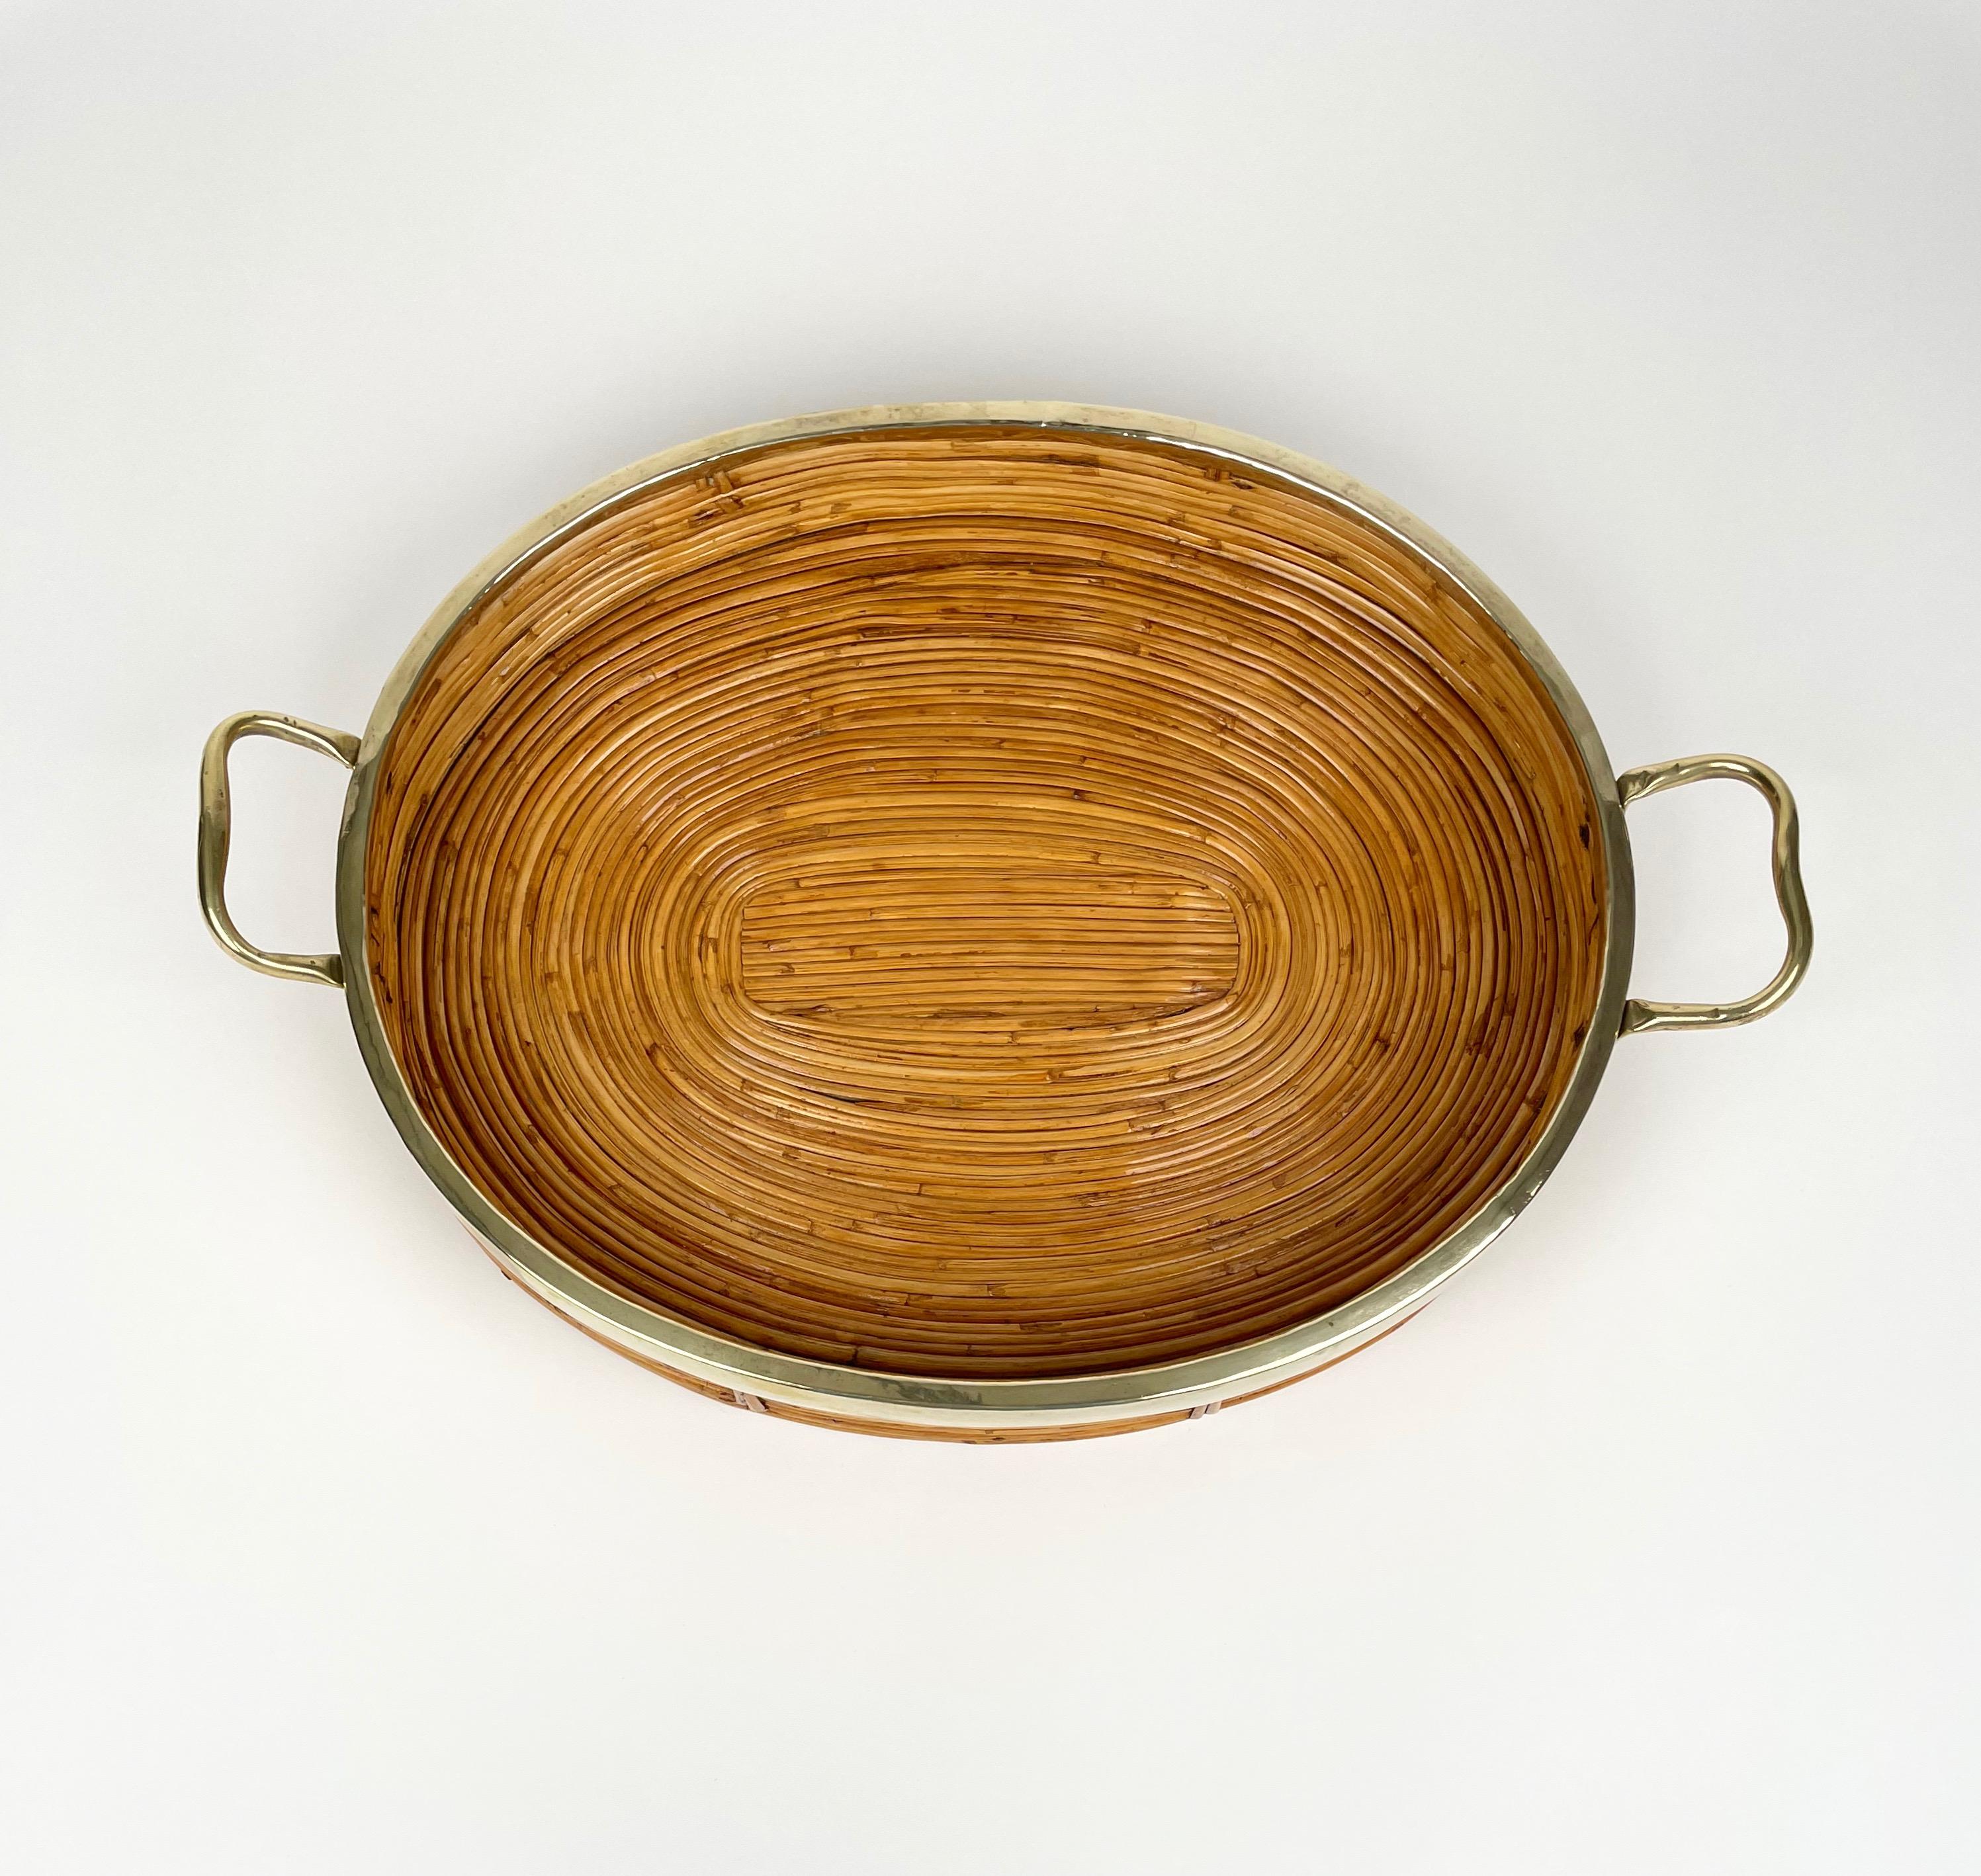 Oval Serving Tray Bamboo, Rattan & Brass, Italy 1970s For Sale 4